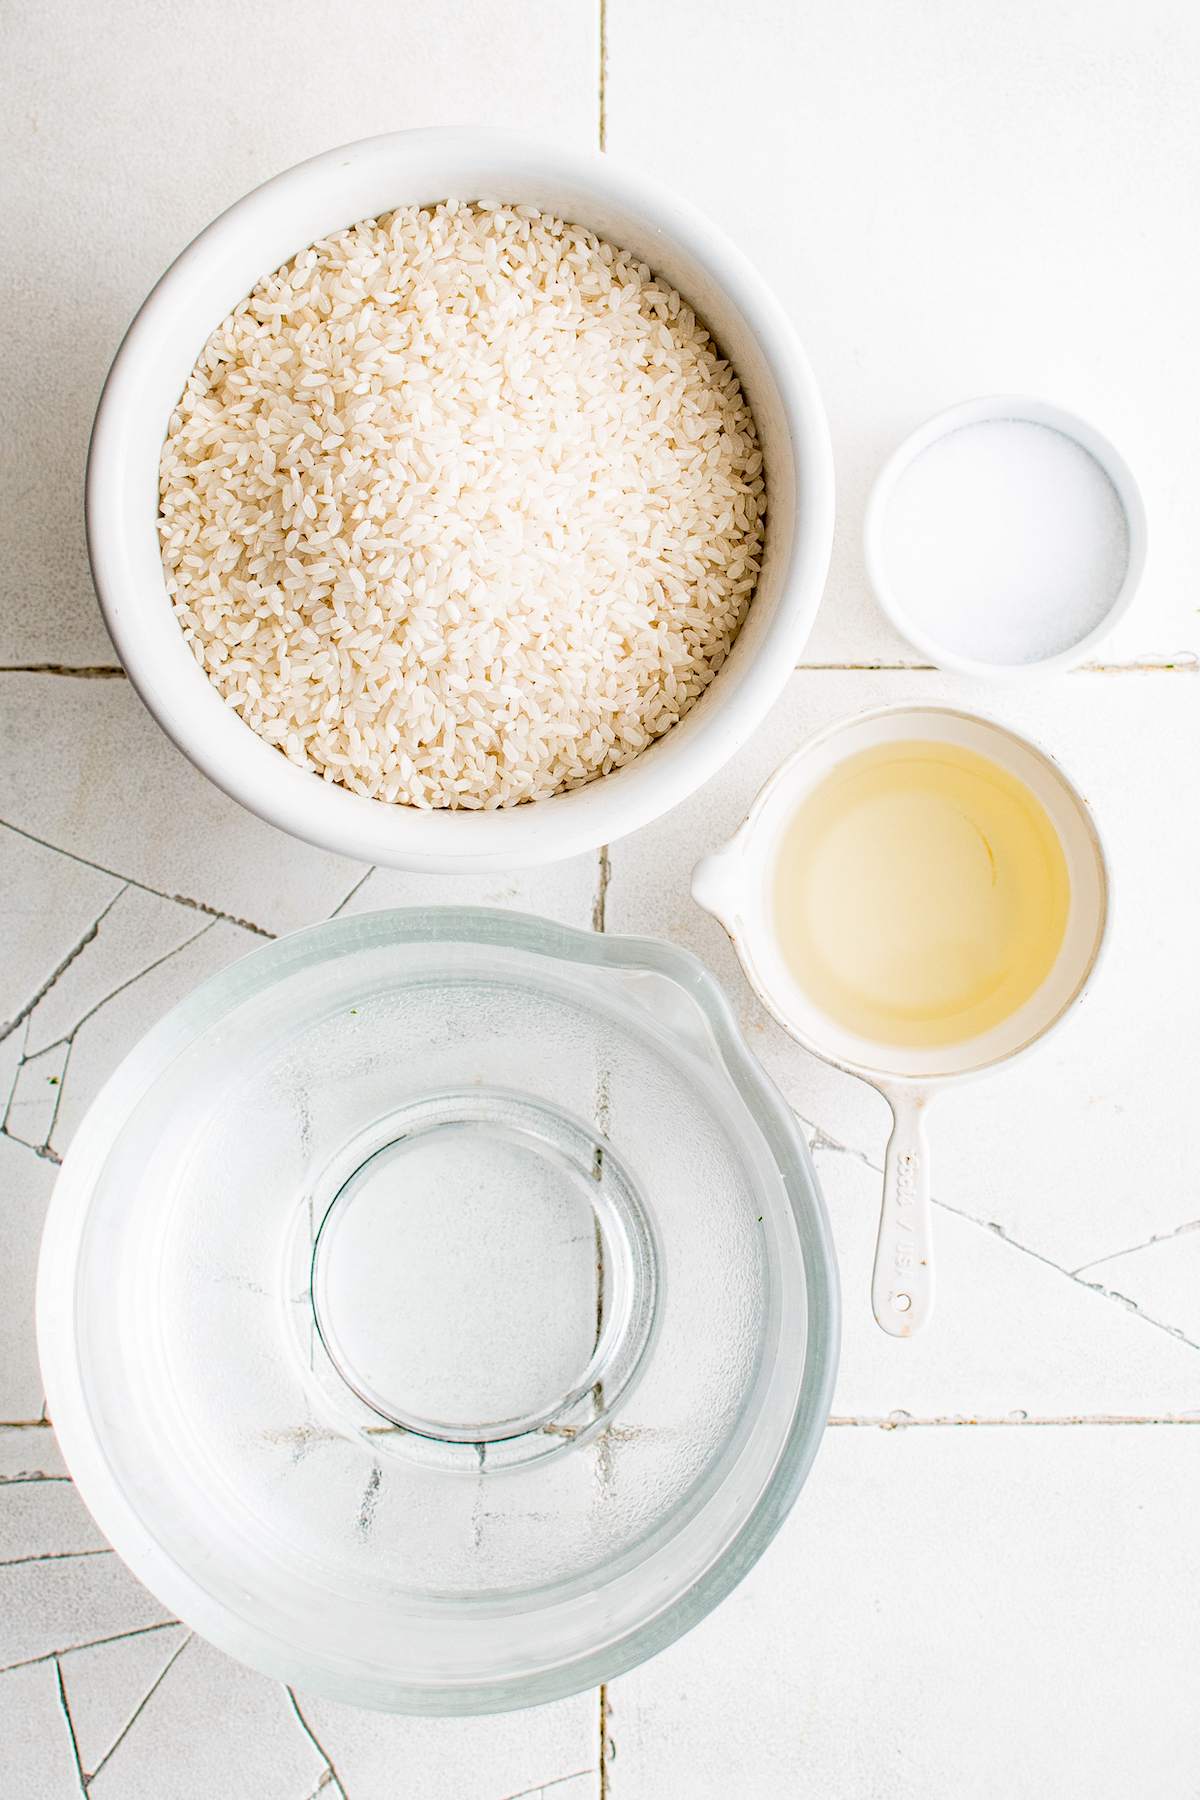 ingredients to cook rice including individual bowls of rice, water, salt, and cooking oil